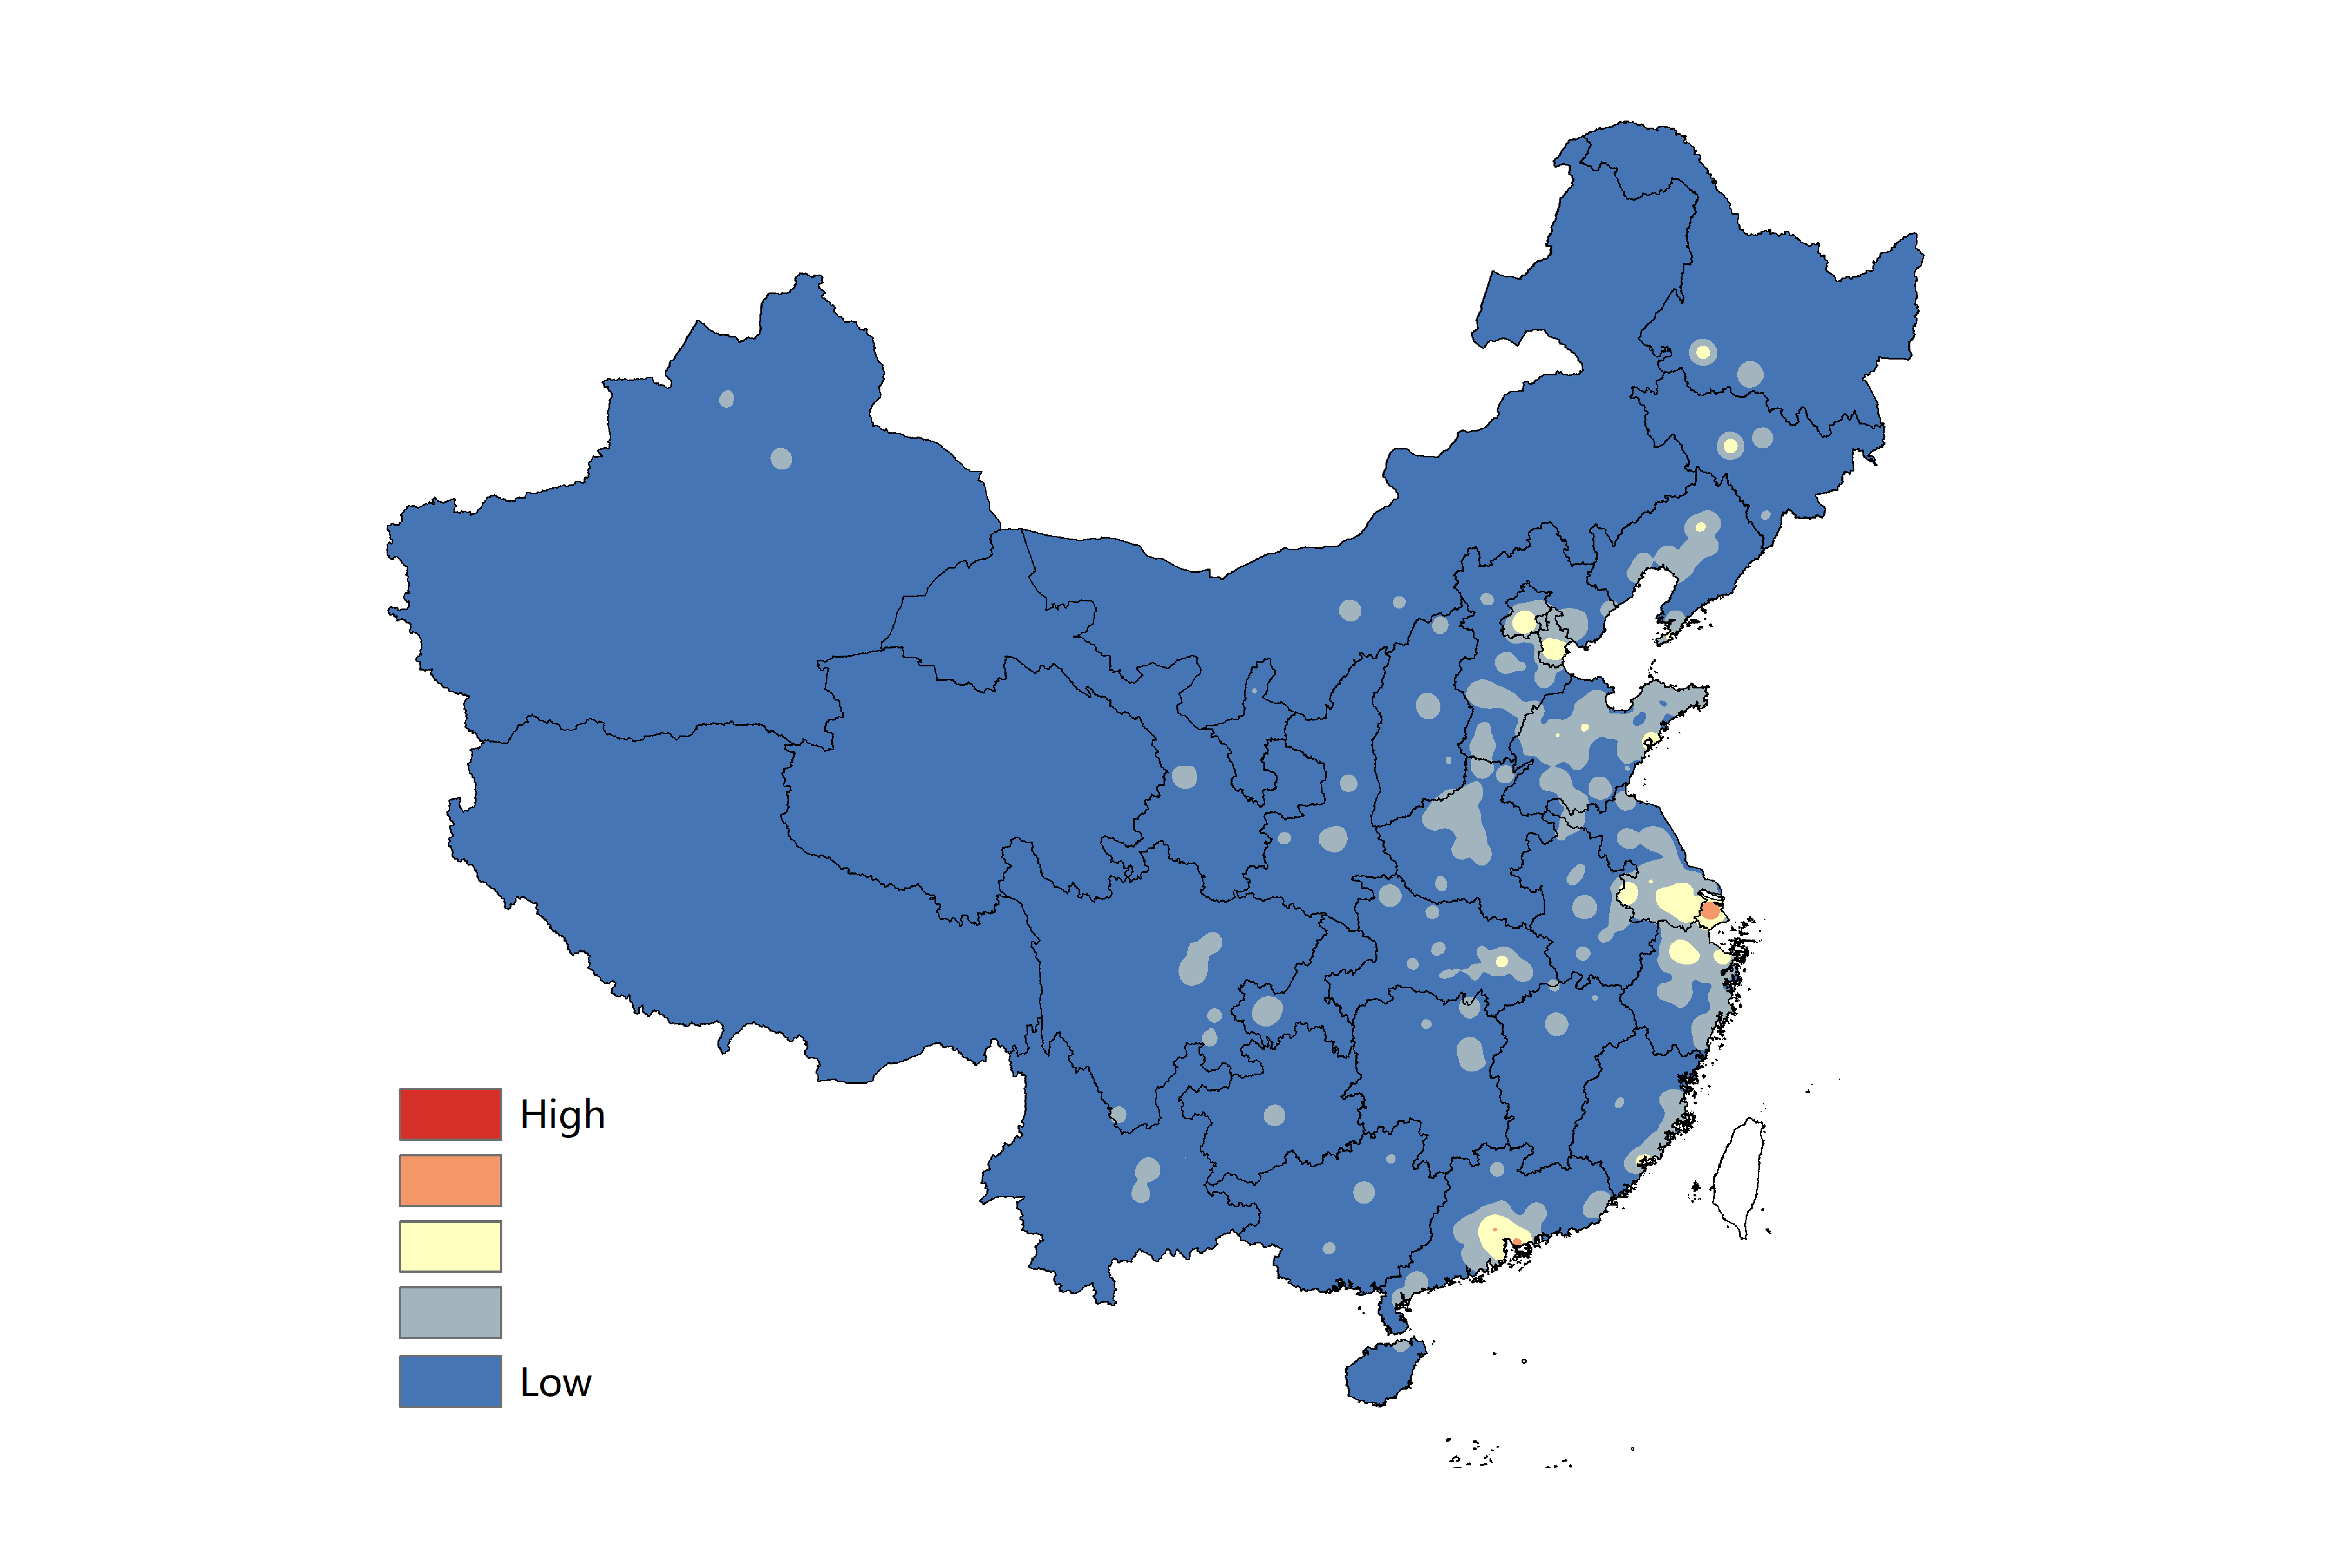 Grid Map: Industrial Output Value of China, 2001-2010